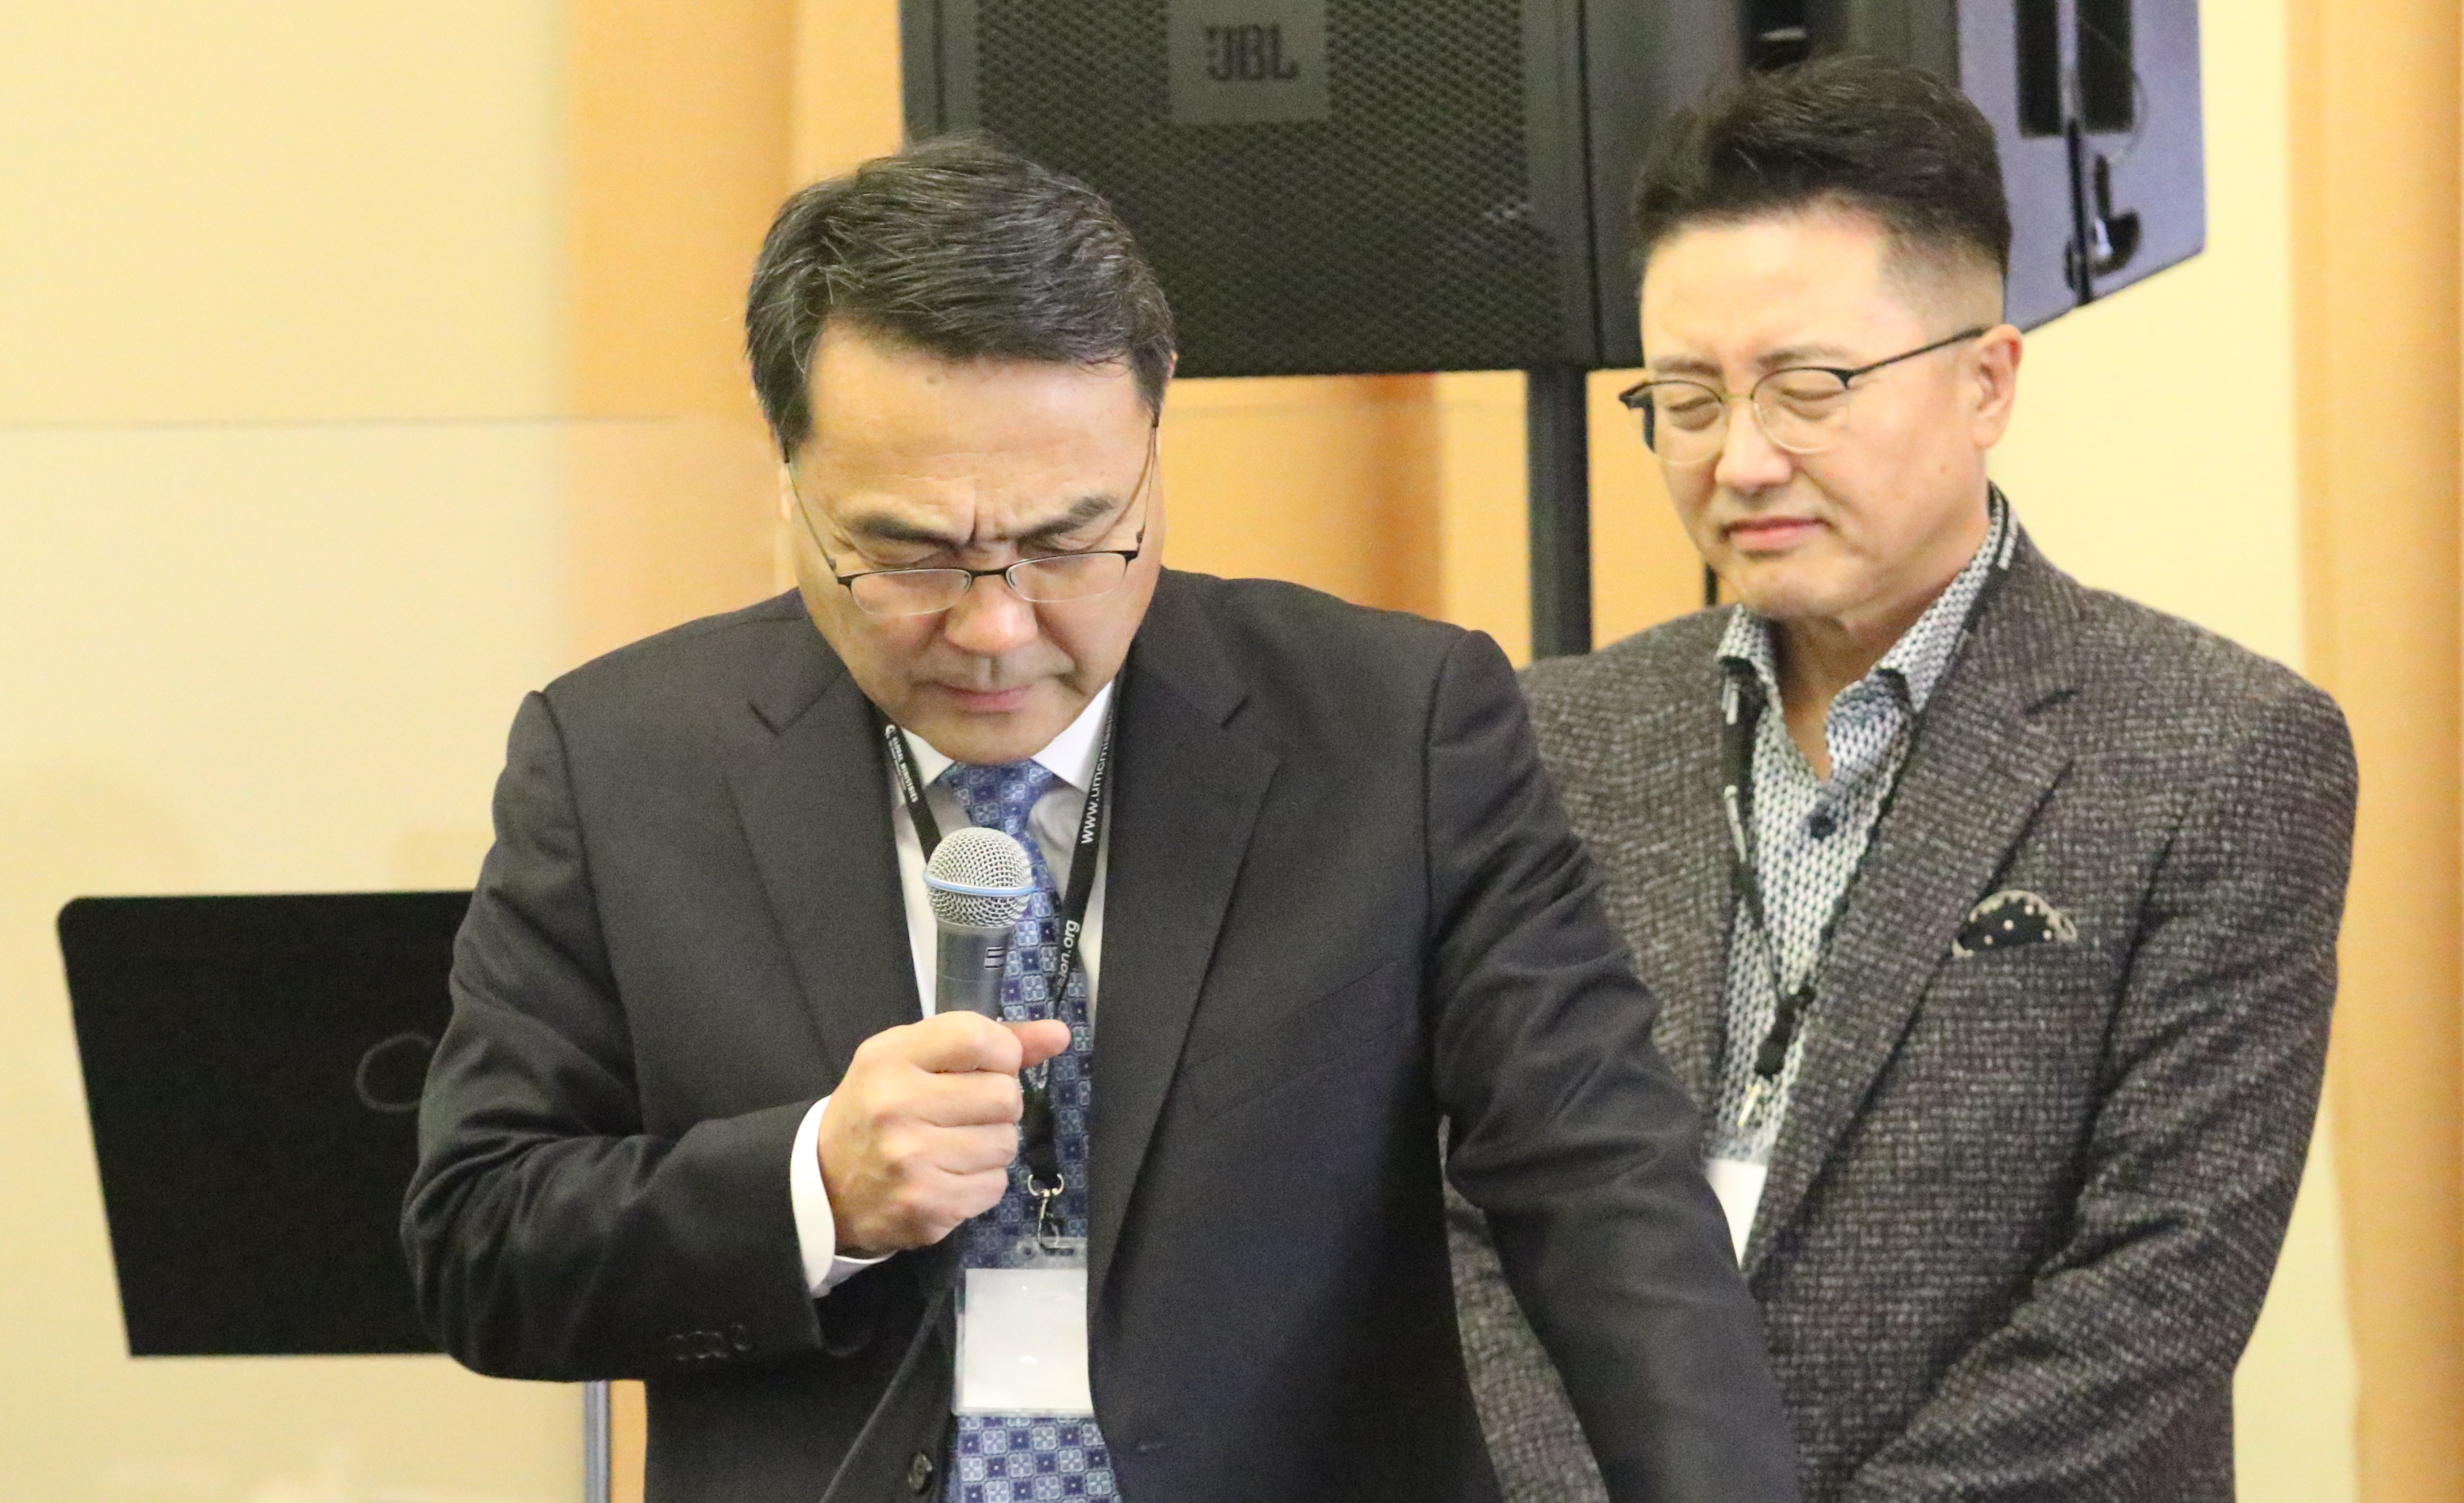 The Rev. Chongho Kim (left) prayed for the meeting. Standing by him is the Rev. Paul Chang, the executive director of the Korean Ministry Plan. Photo by Thomas Kim, UMNS.